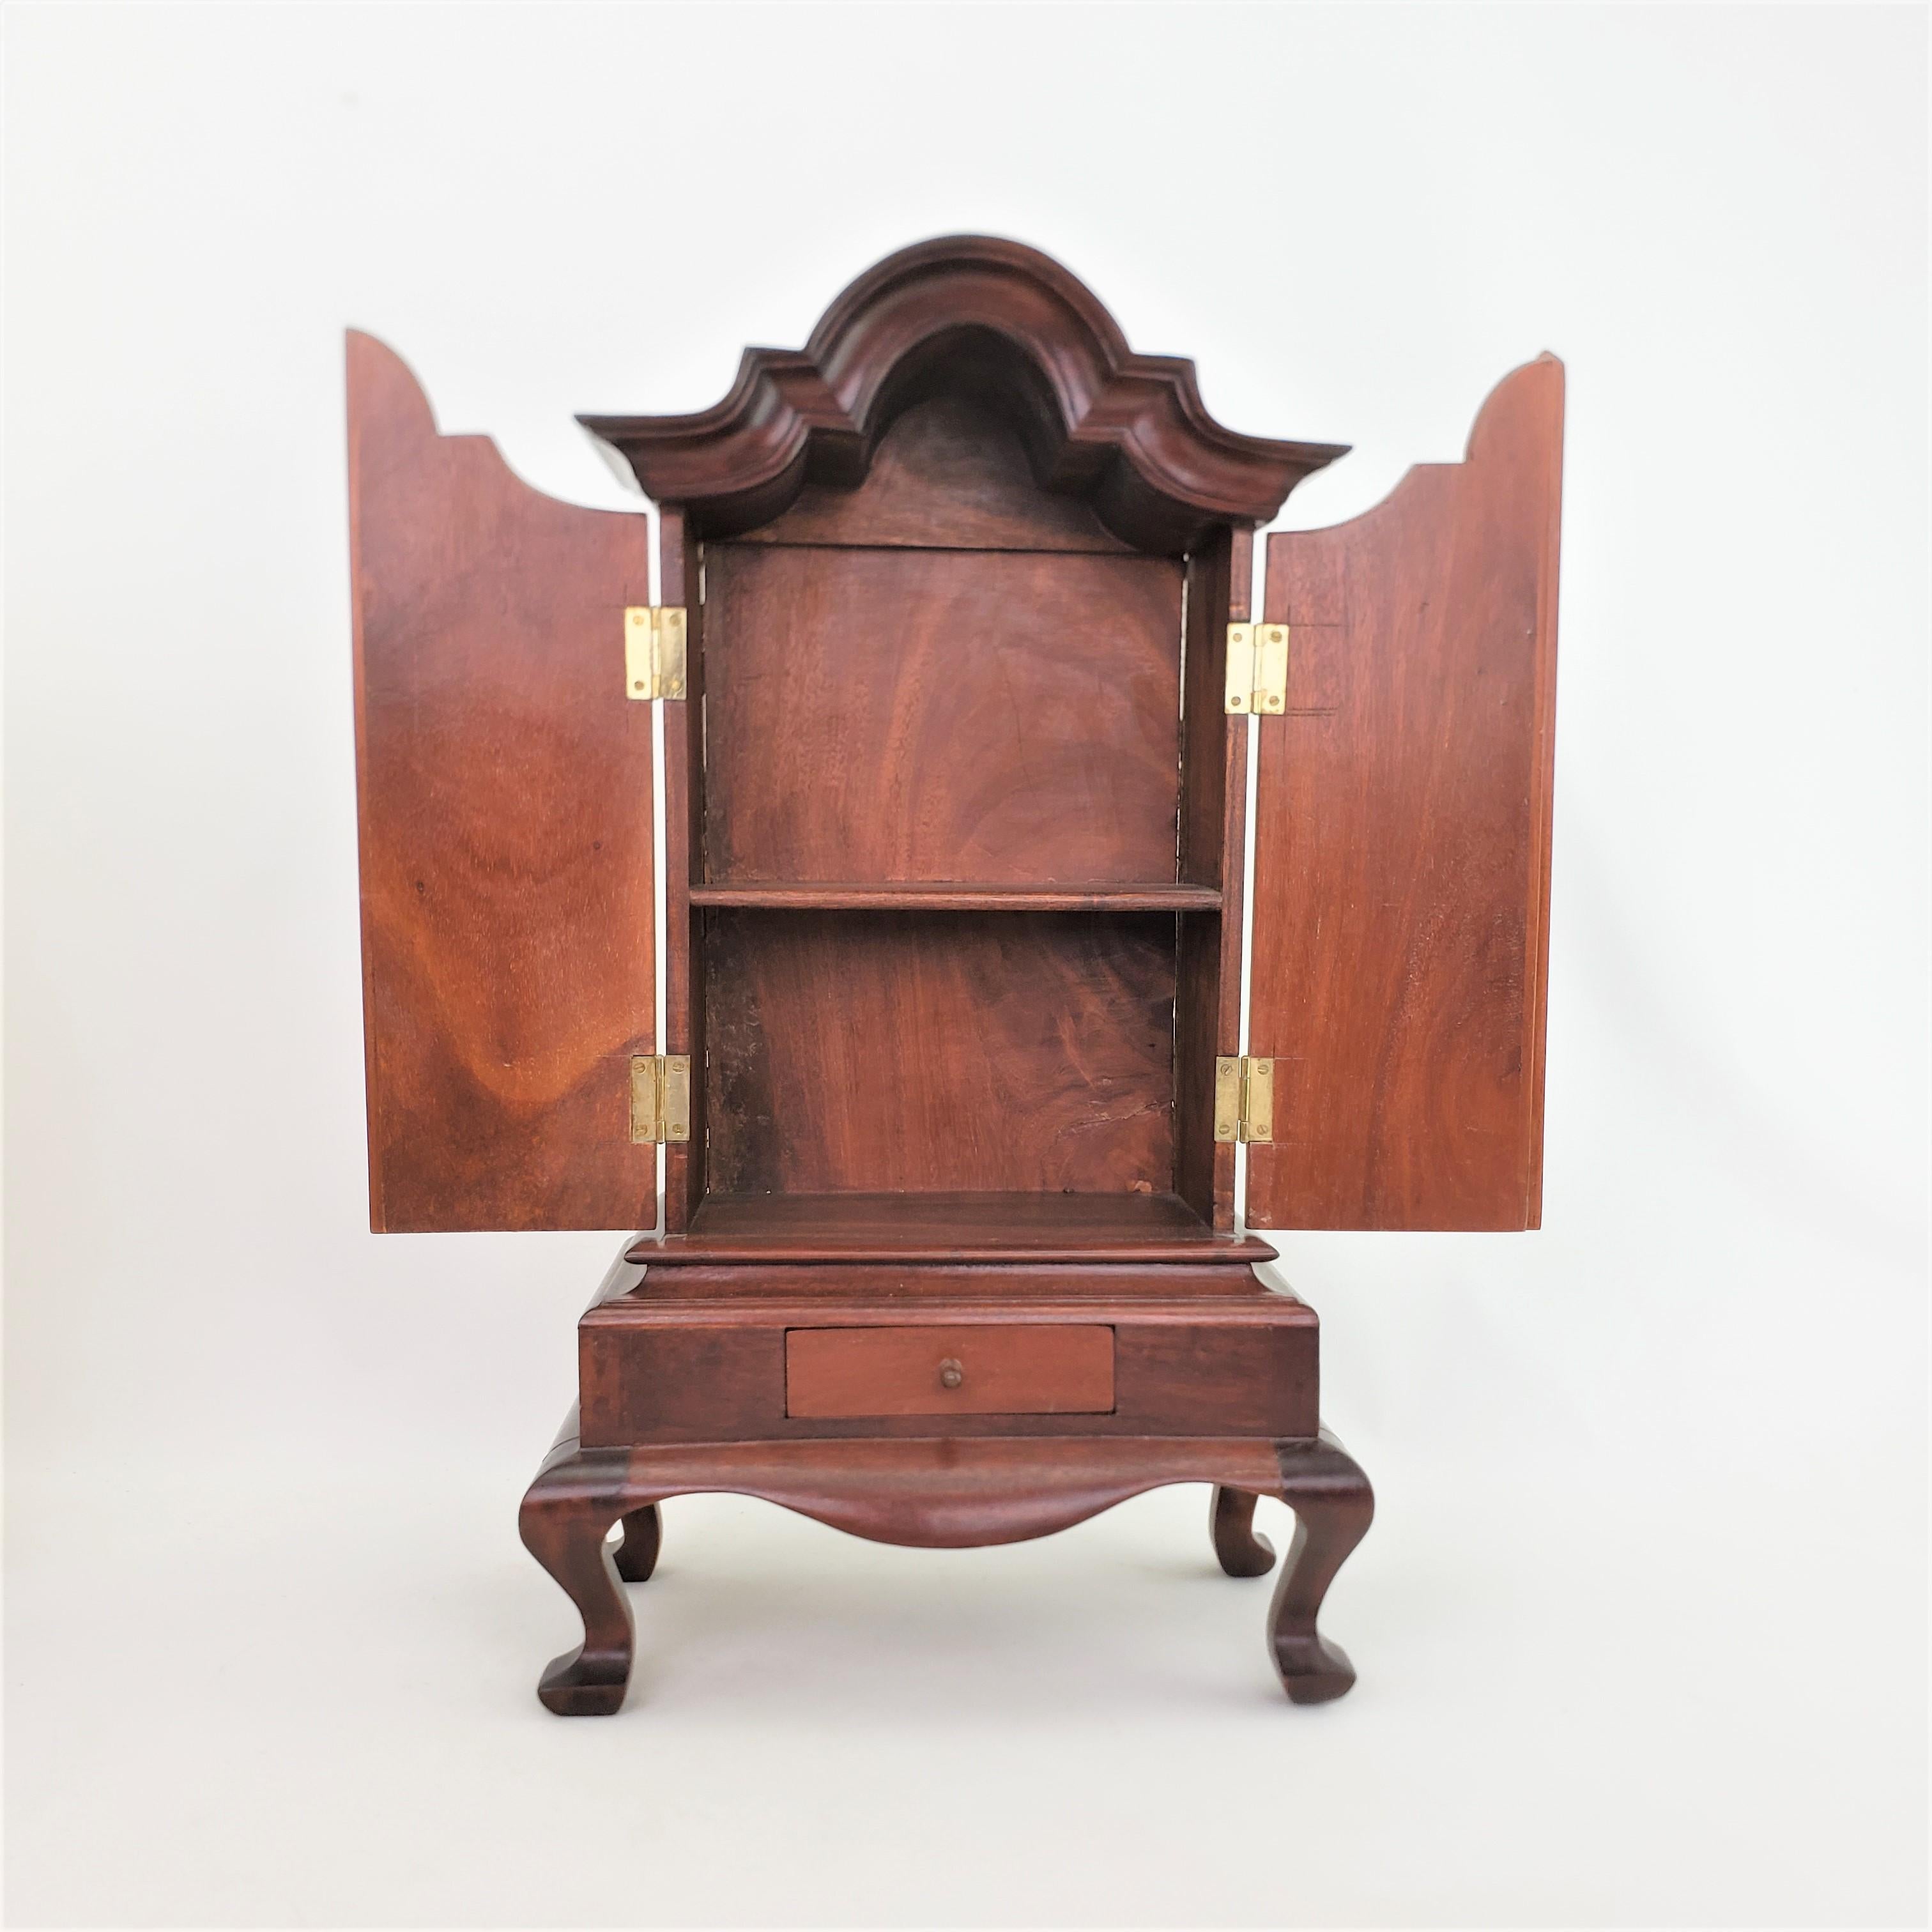 Miniature Mid-Century Era Wooden Queen Anne Styled Vanity Cabinet or Cuphoard  For Sale 1